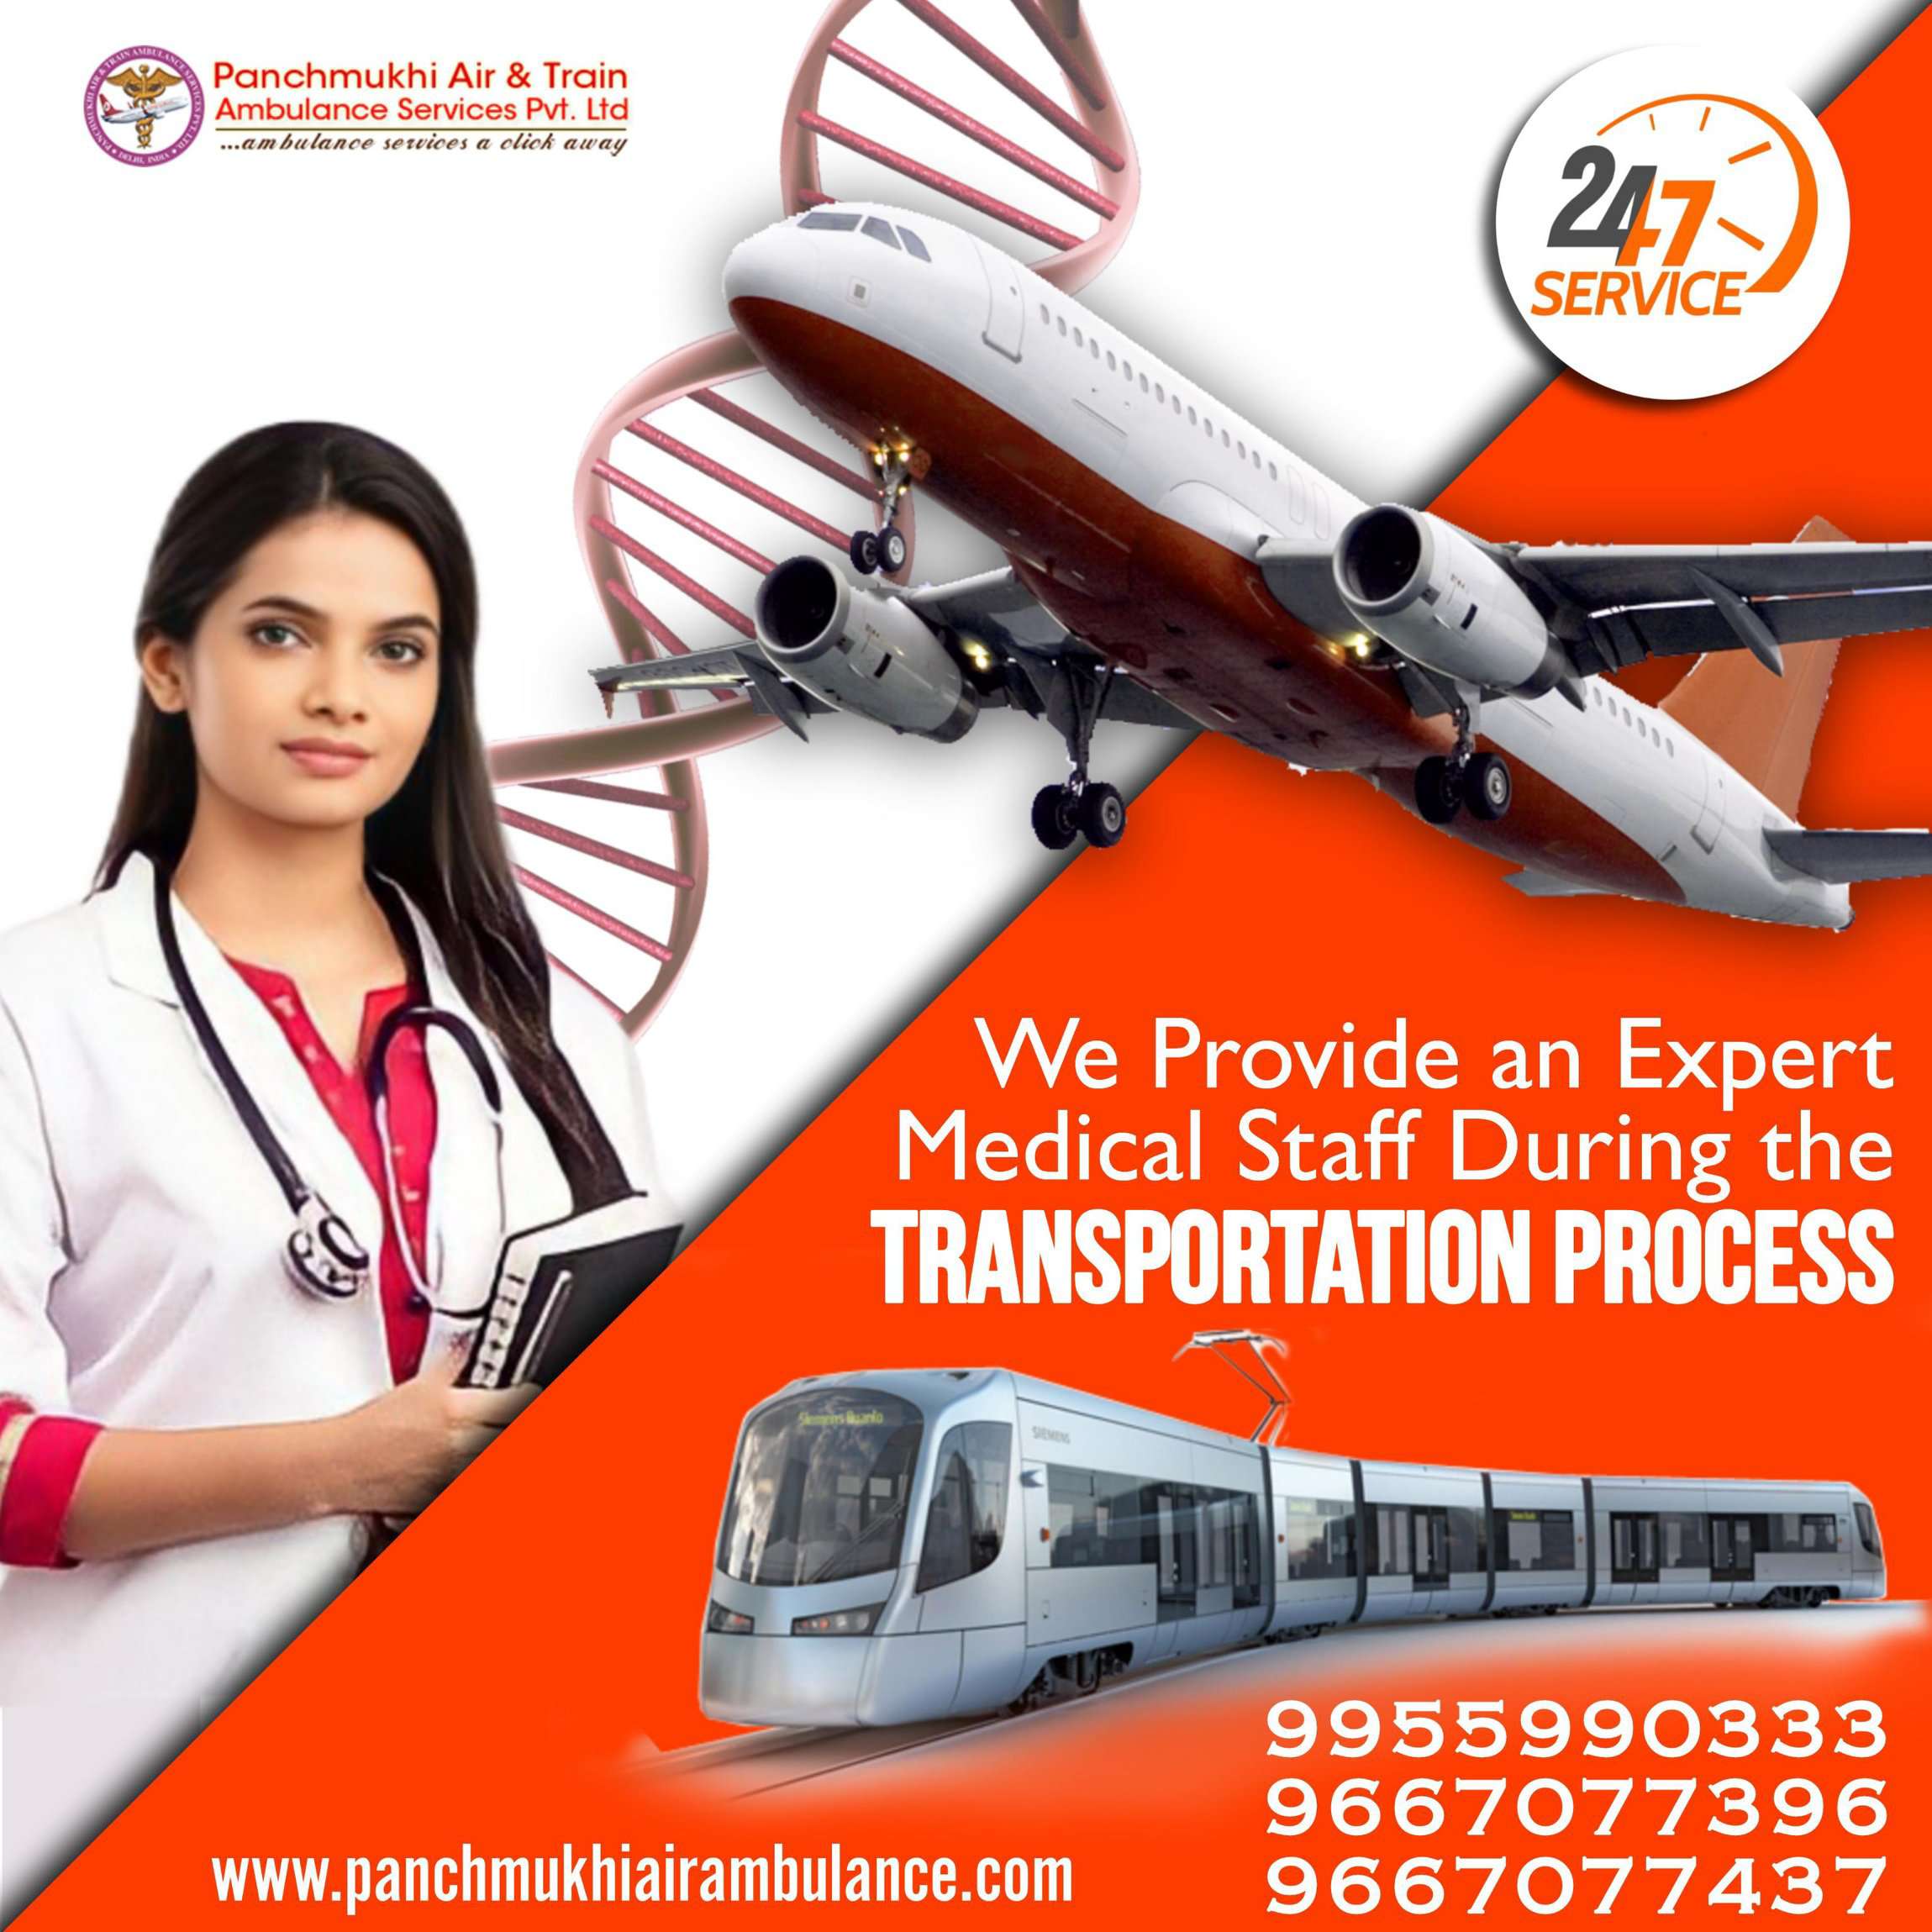 Panchmukhi Air Ambulance Services in Chennai Offers Quality Services for Patients in Need